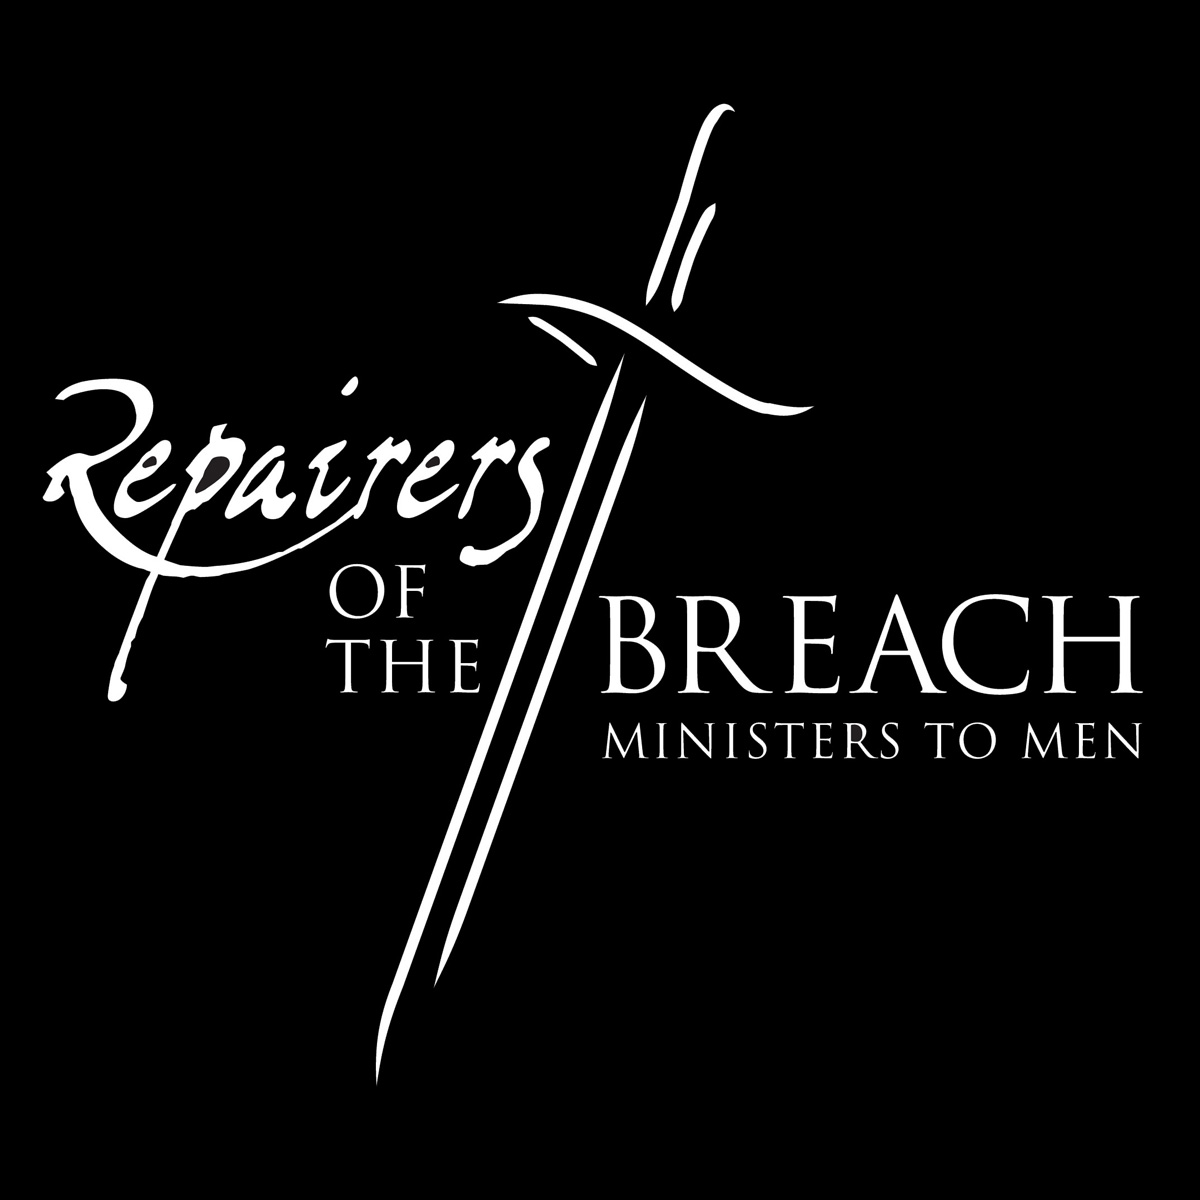 Repairers of the Breach Conference 2012 session 3 - Pastor Bernie McLaughlin